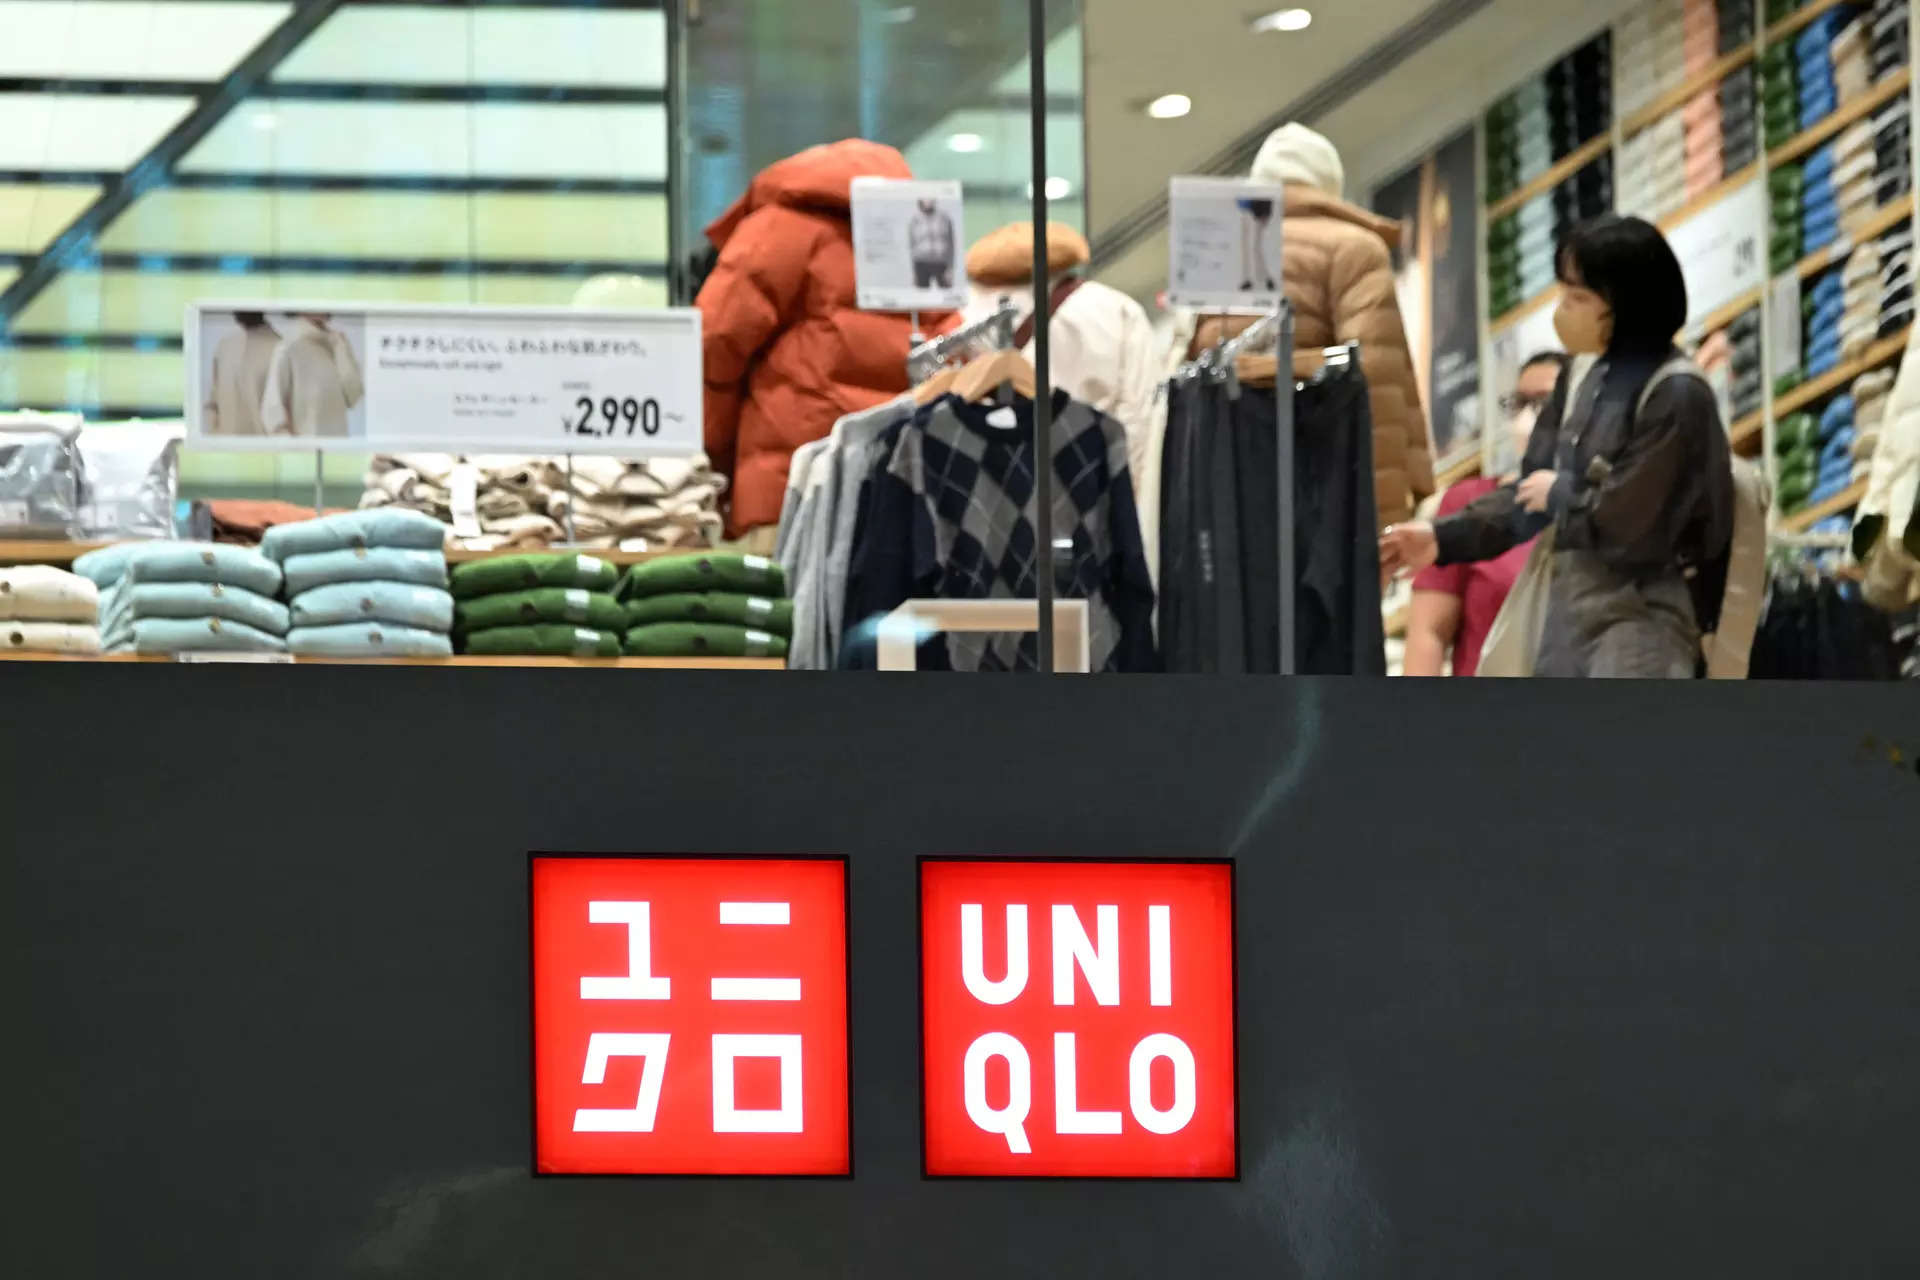 Swap your old clothes for discount coupons at Uniqlo Japan